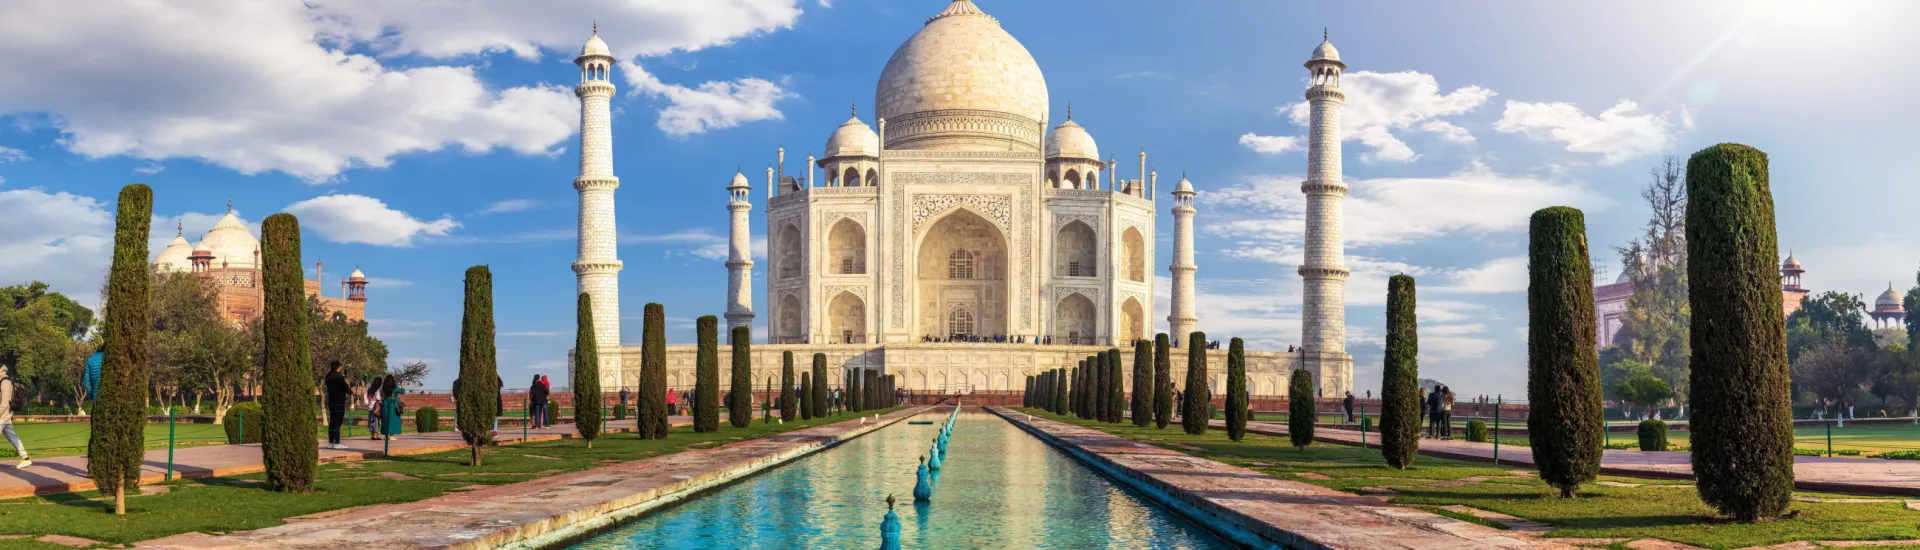 The iconic monument in India, known as the Taj Mahal